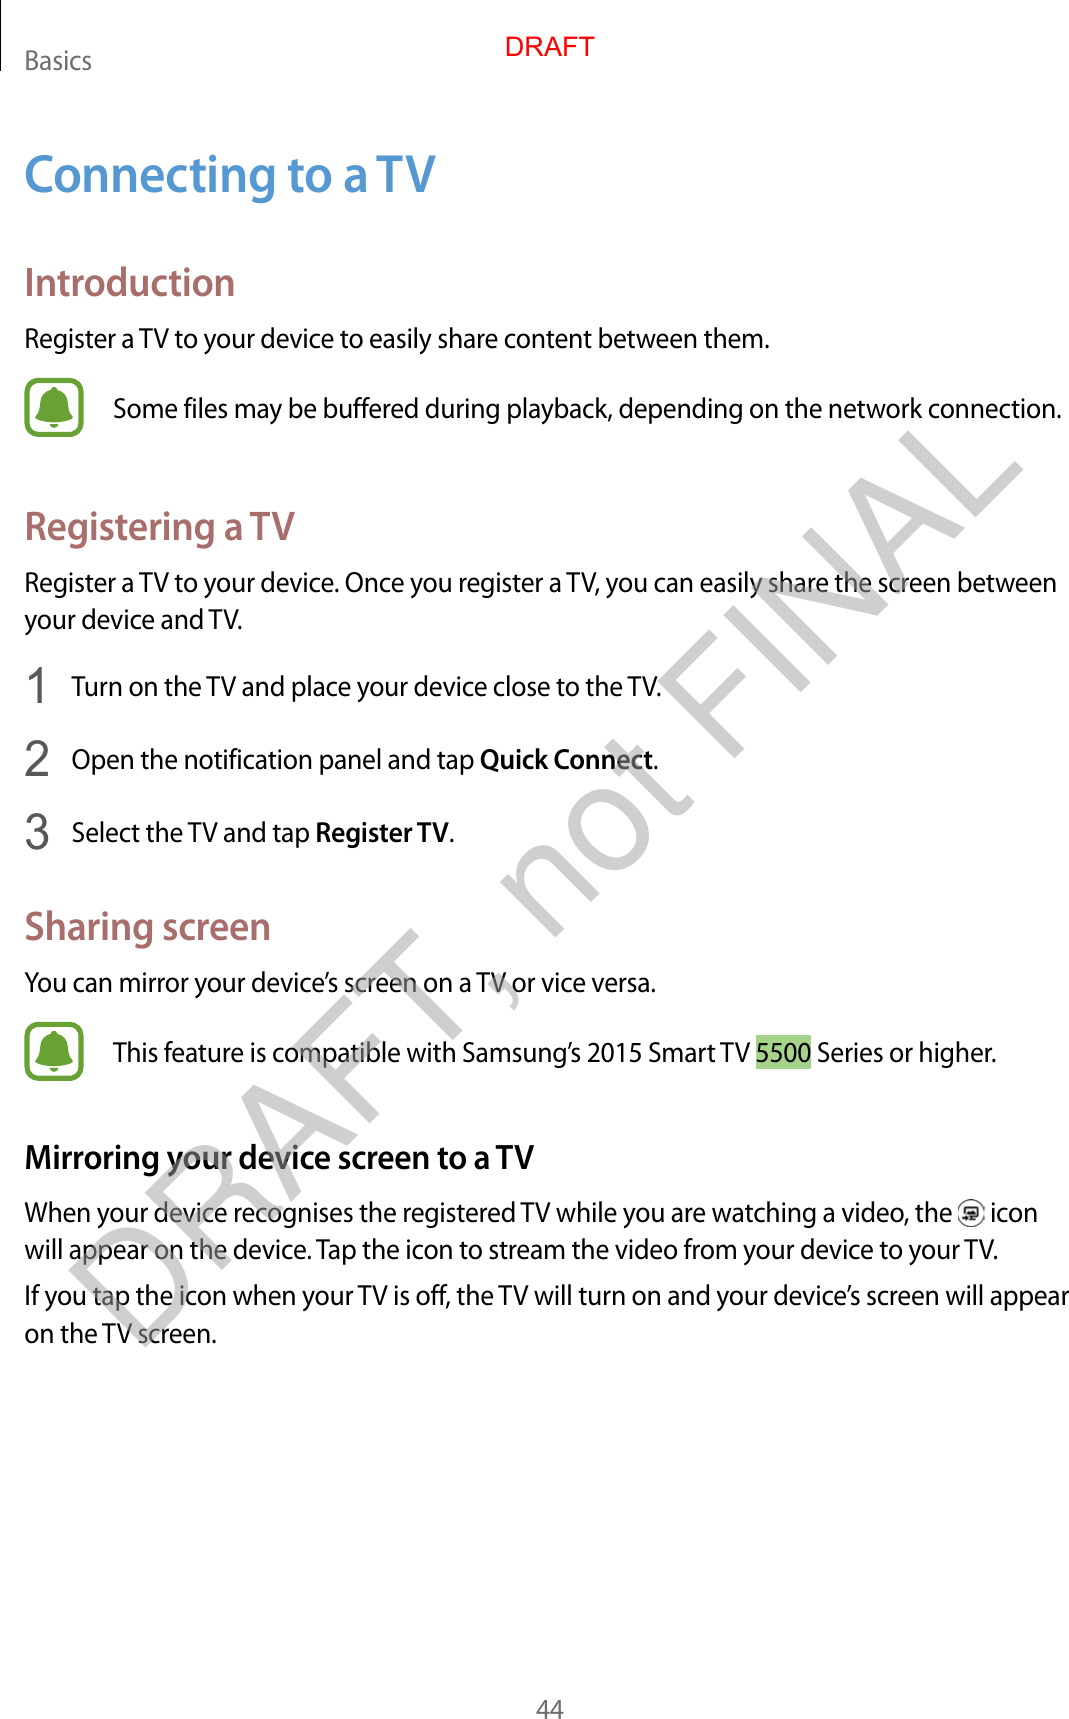 Basics44Connecting to a TVIntroductionRegister a TV to your device to easily share content between them.Some files may be buffered during playback, depending on the network connection.Registering a TVRegister a TV to your device. Once you register a TV, you can easily share the screen between your device and TV.1  Turn on the TV and place your device close to the TV.2  Open the notification panel and tap Quick Connect.3  Select the TV and tap Register TV.Sharing screenYou can mirror your device’s screen on a TV or vice versa.This feature is compatible with Samsung’s 2015 Smart TV 5500 Series or higher.Mirroring your device screen to a TVWhen your device recognises the registered TV while you are watching a video, the   icon will appear on the device. Tap the icon to stream the video from your device to your TV.If you tap the icon when your TV is off, the TV will turn on and your device’s screen will appear on the TV screen.DRAFTDRAFT, not FINAL